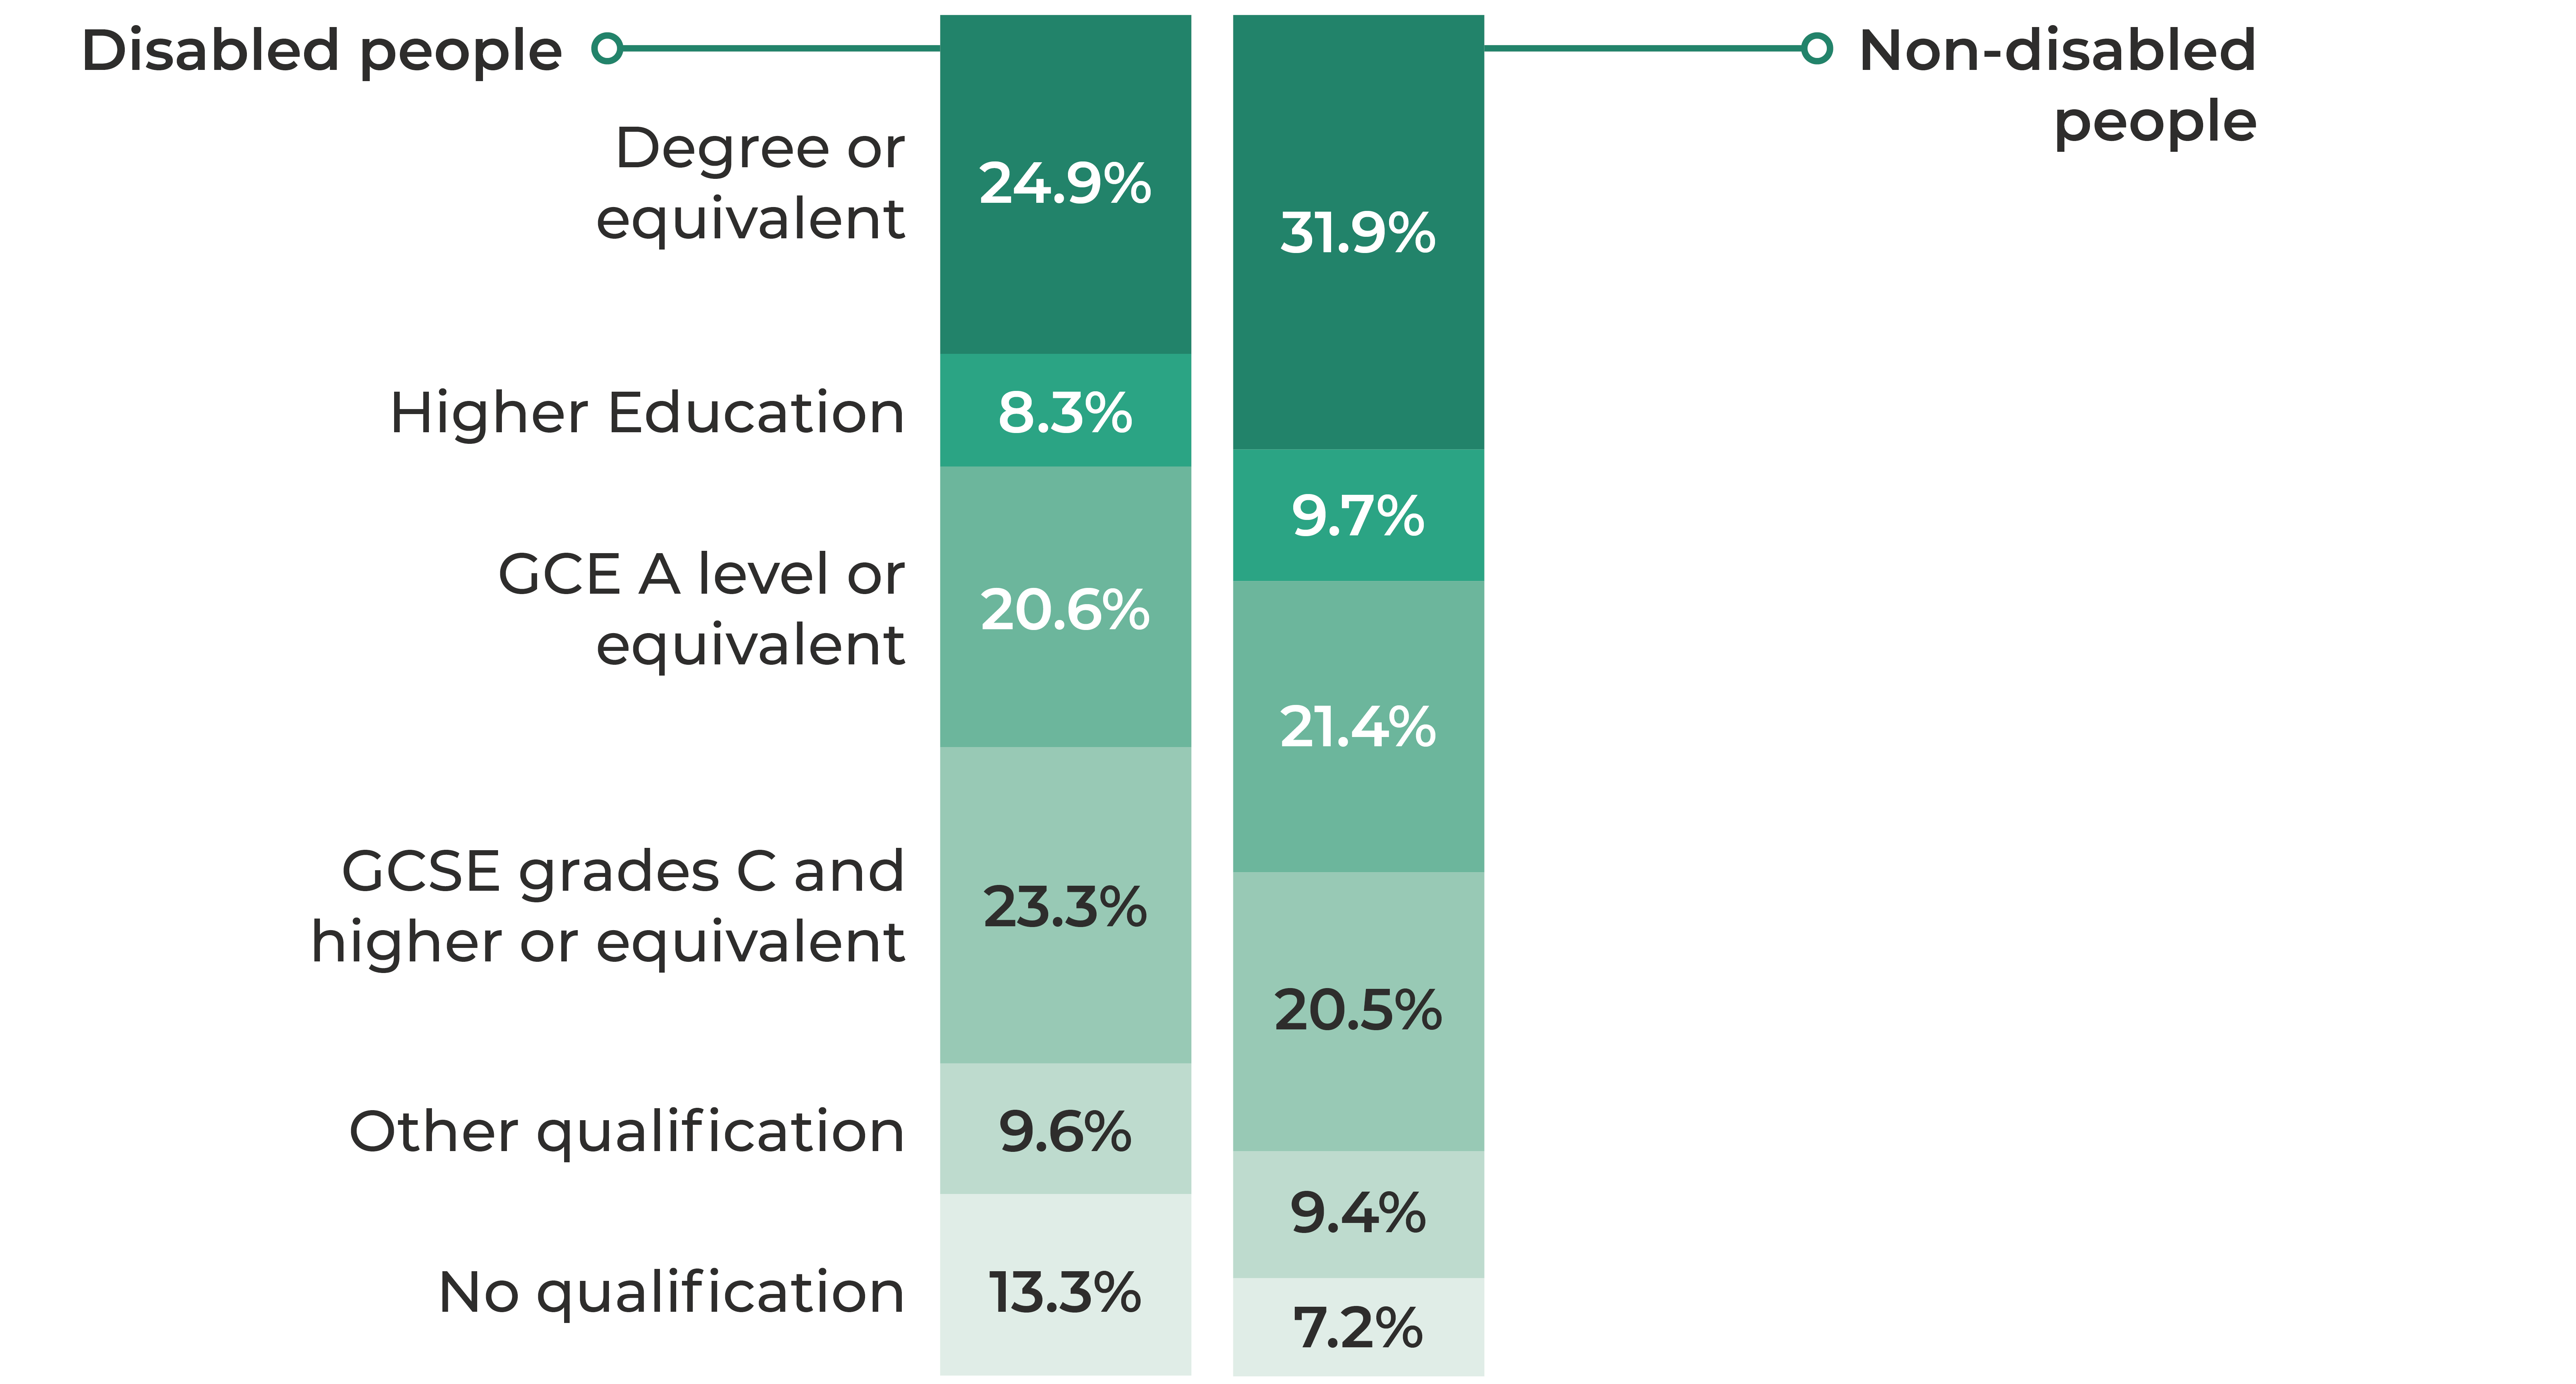 Chart showing the highest level of qualification of people aged 21 to 64 by disability status in the UK between July 2020 and June 2021